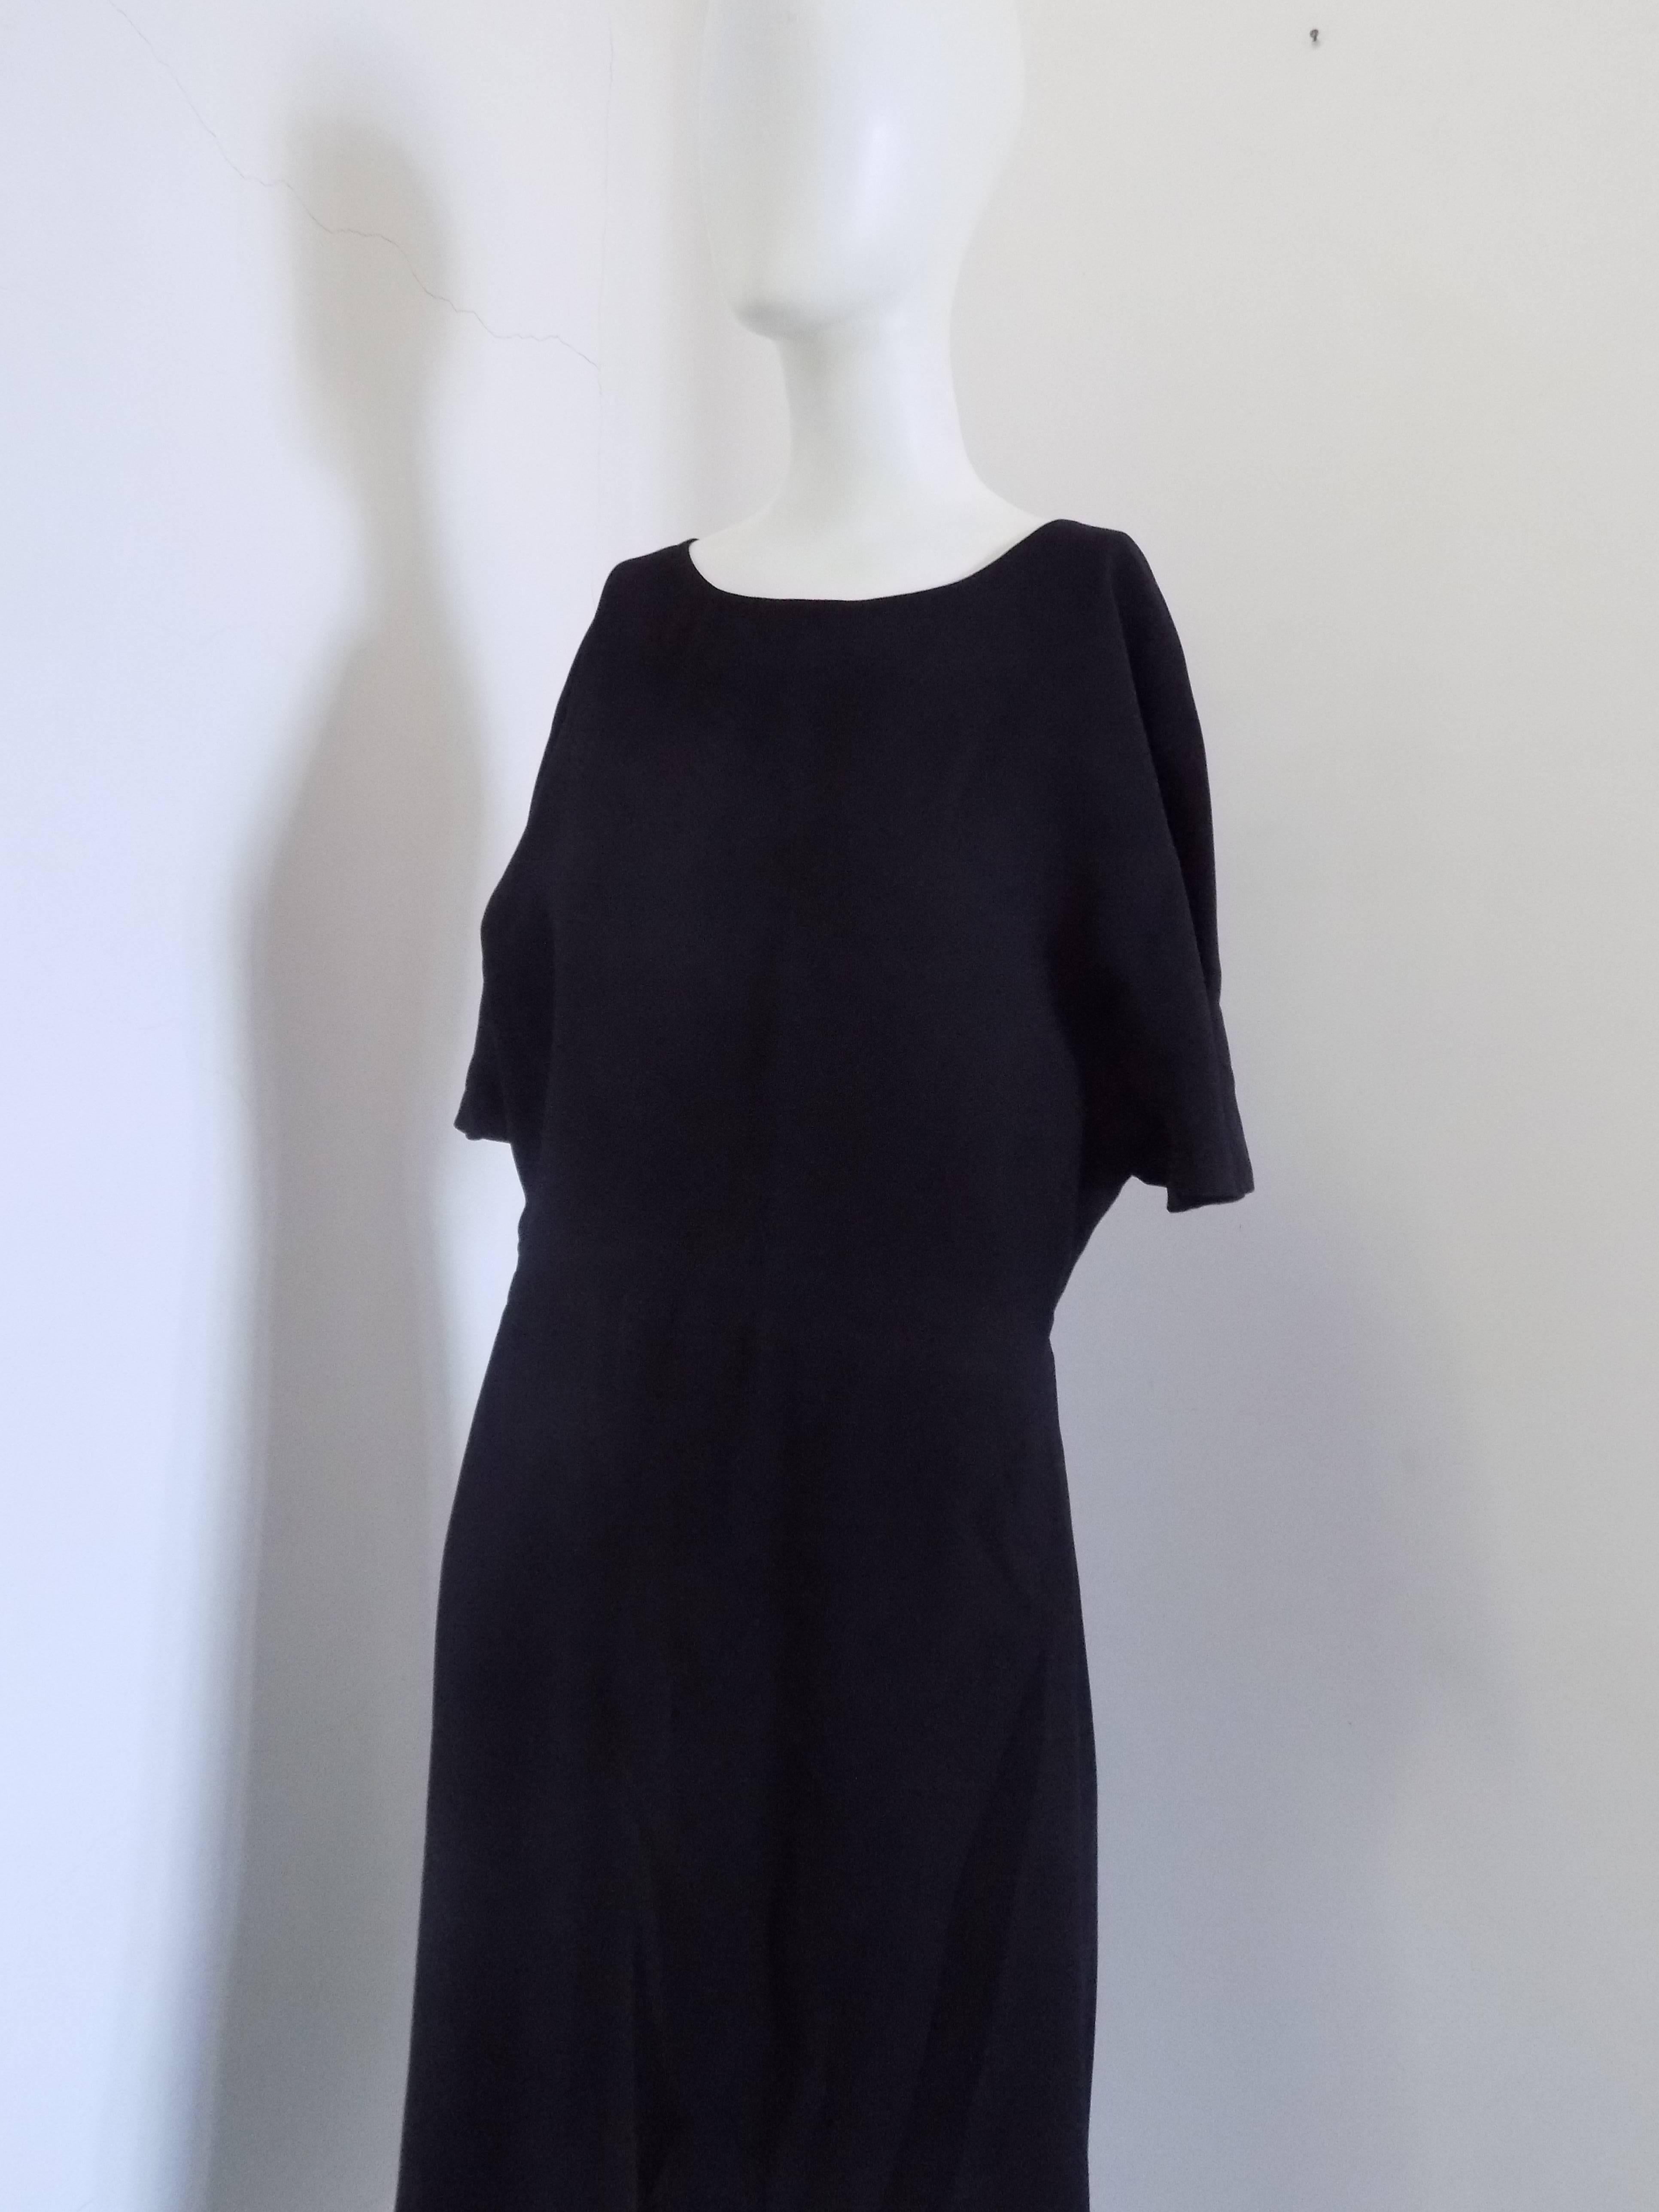 1990s Valentino Black Dress

Totally made in italy in italian size range 44

Composition: Viscose and elastane